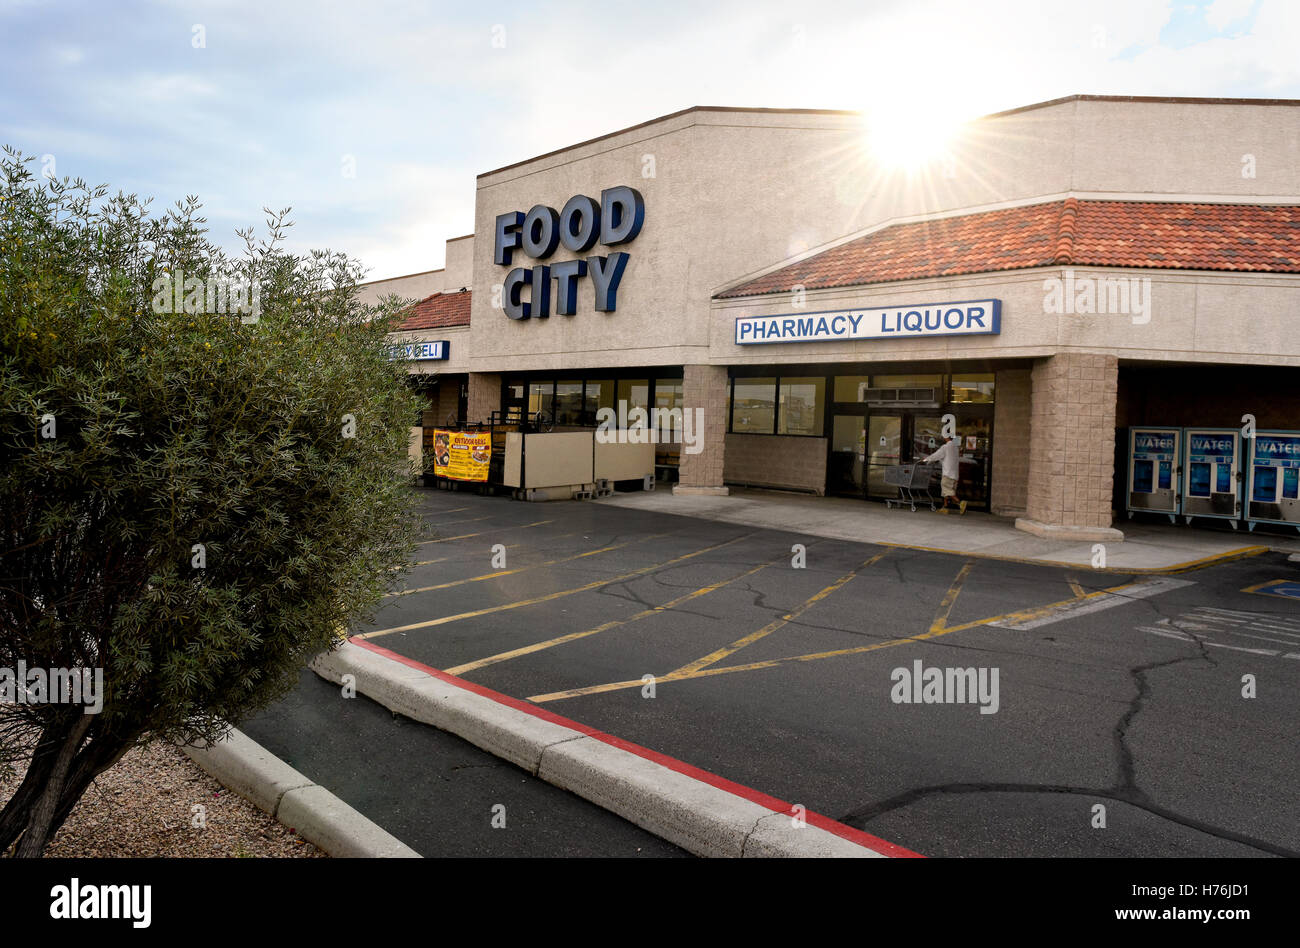 Food City Grocery Store at Sunset in a Strip Mall Shopping Center, Lake Havasu City, Arizona Stock Photo